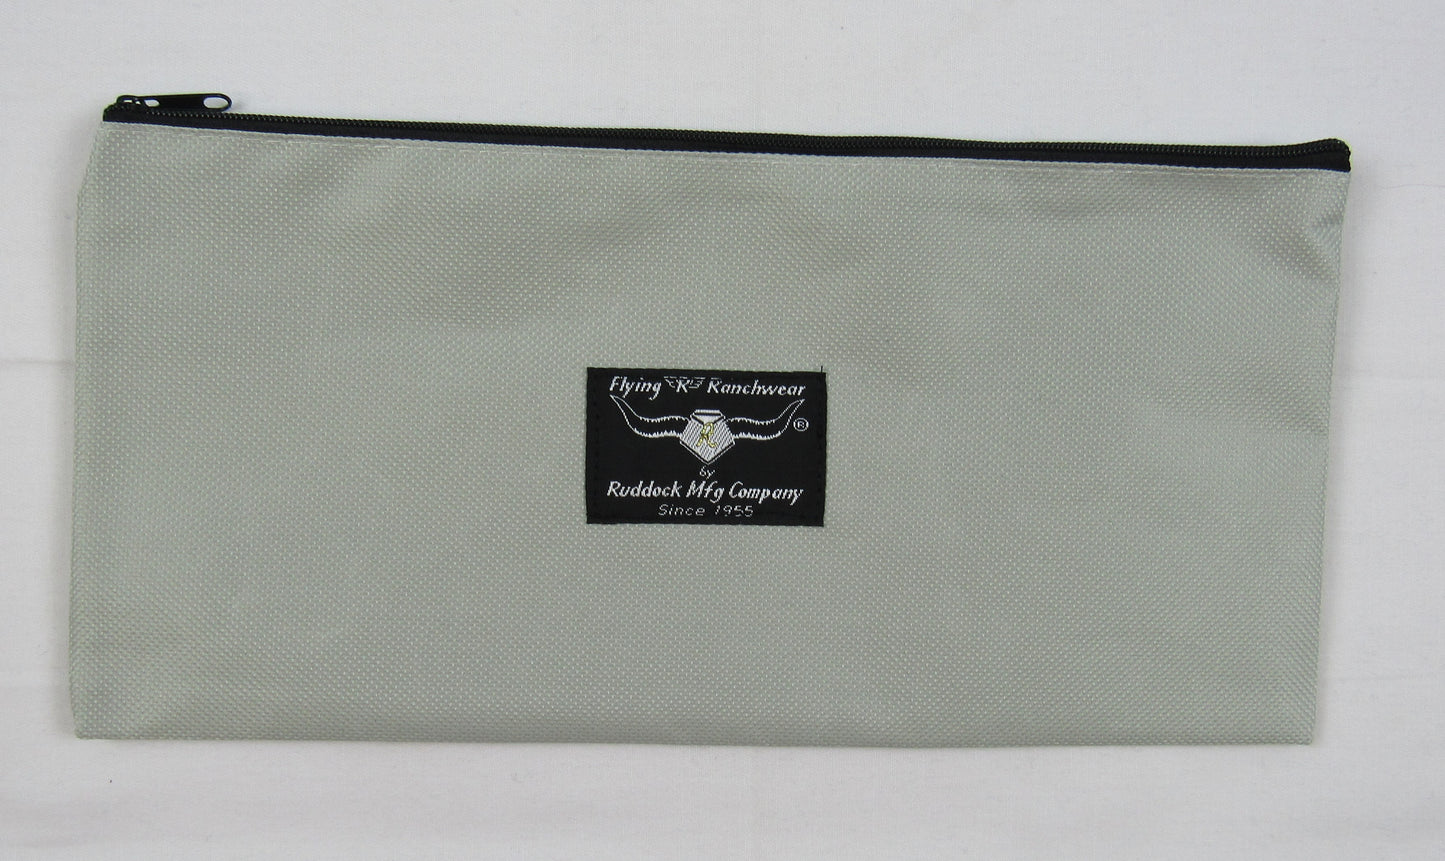 zippered gear bag in light gray color